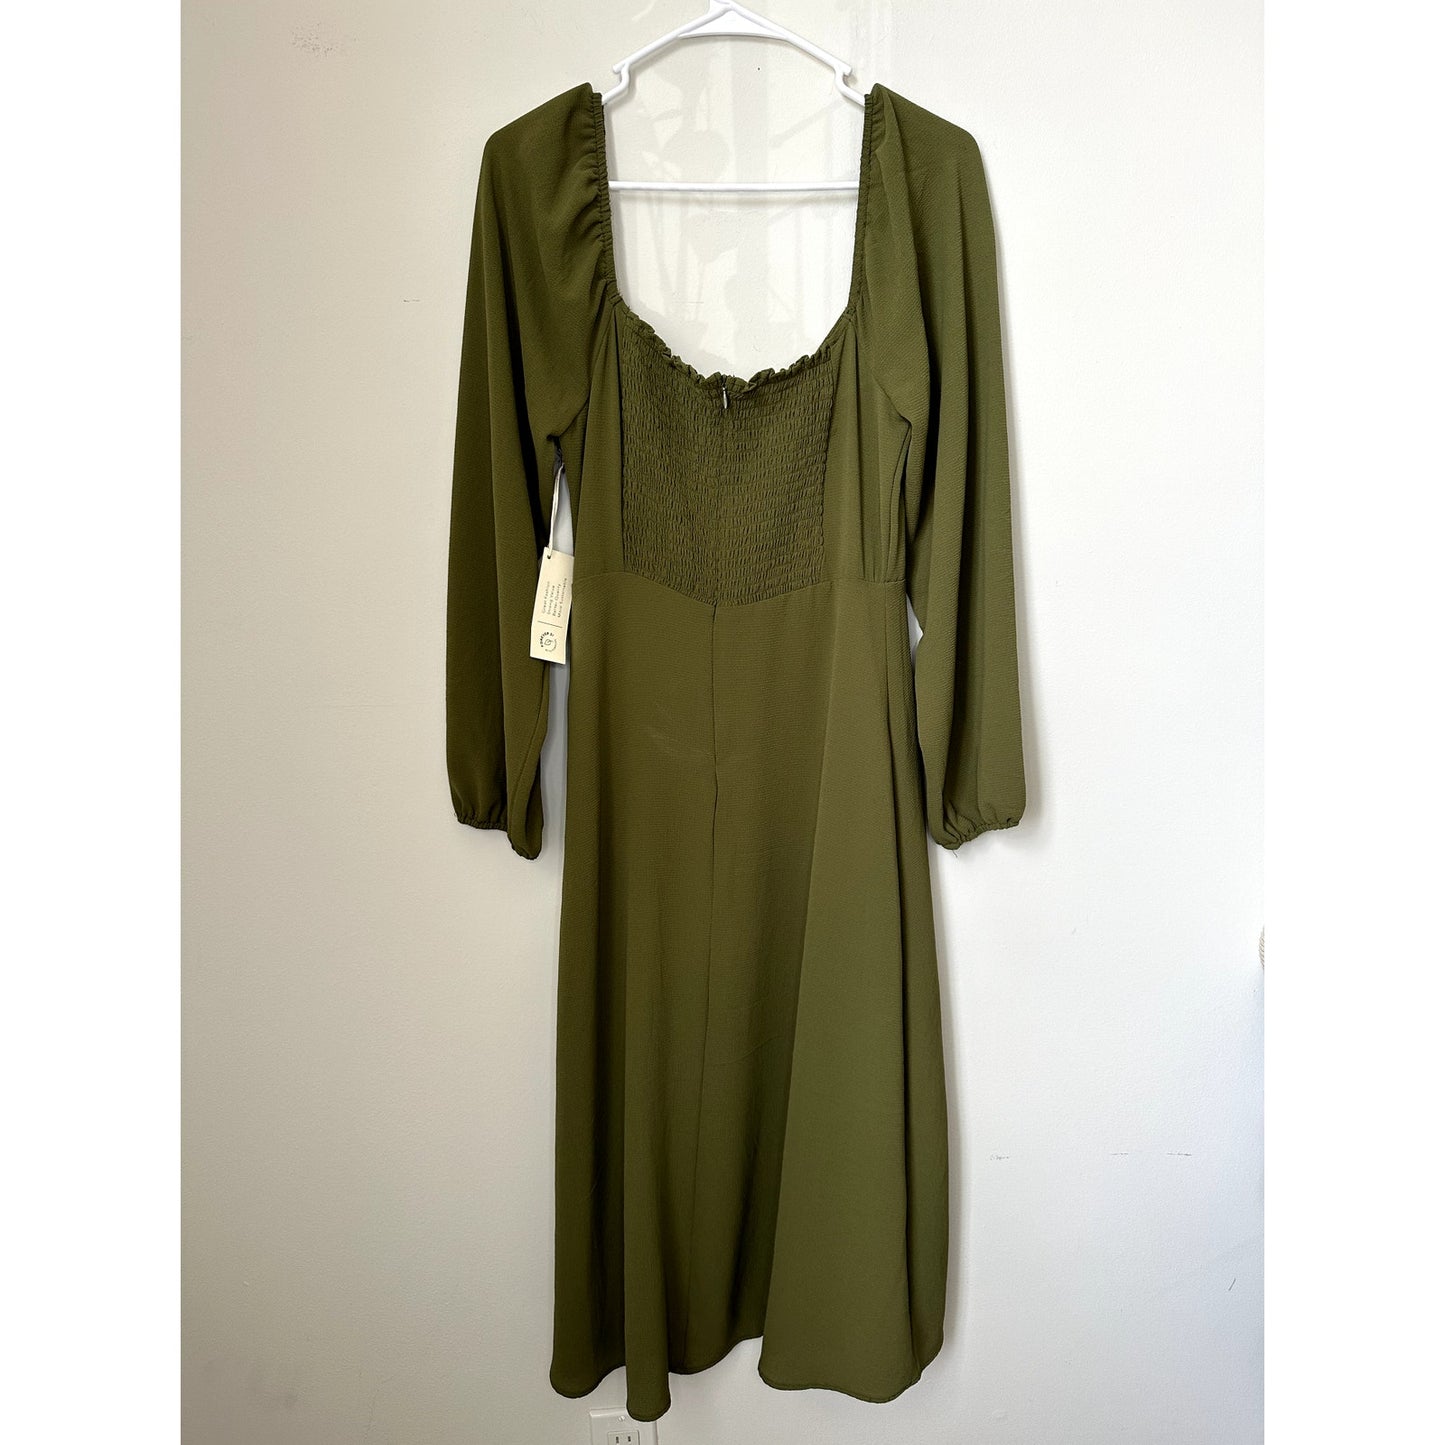 NWT Forever 21 Green Long Sleeve Midi Dress, Size M